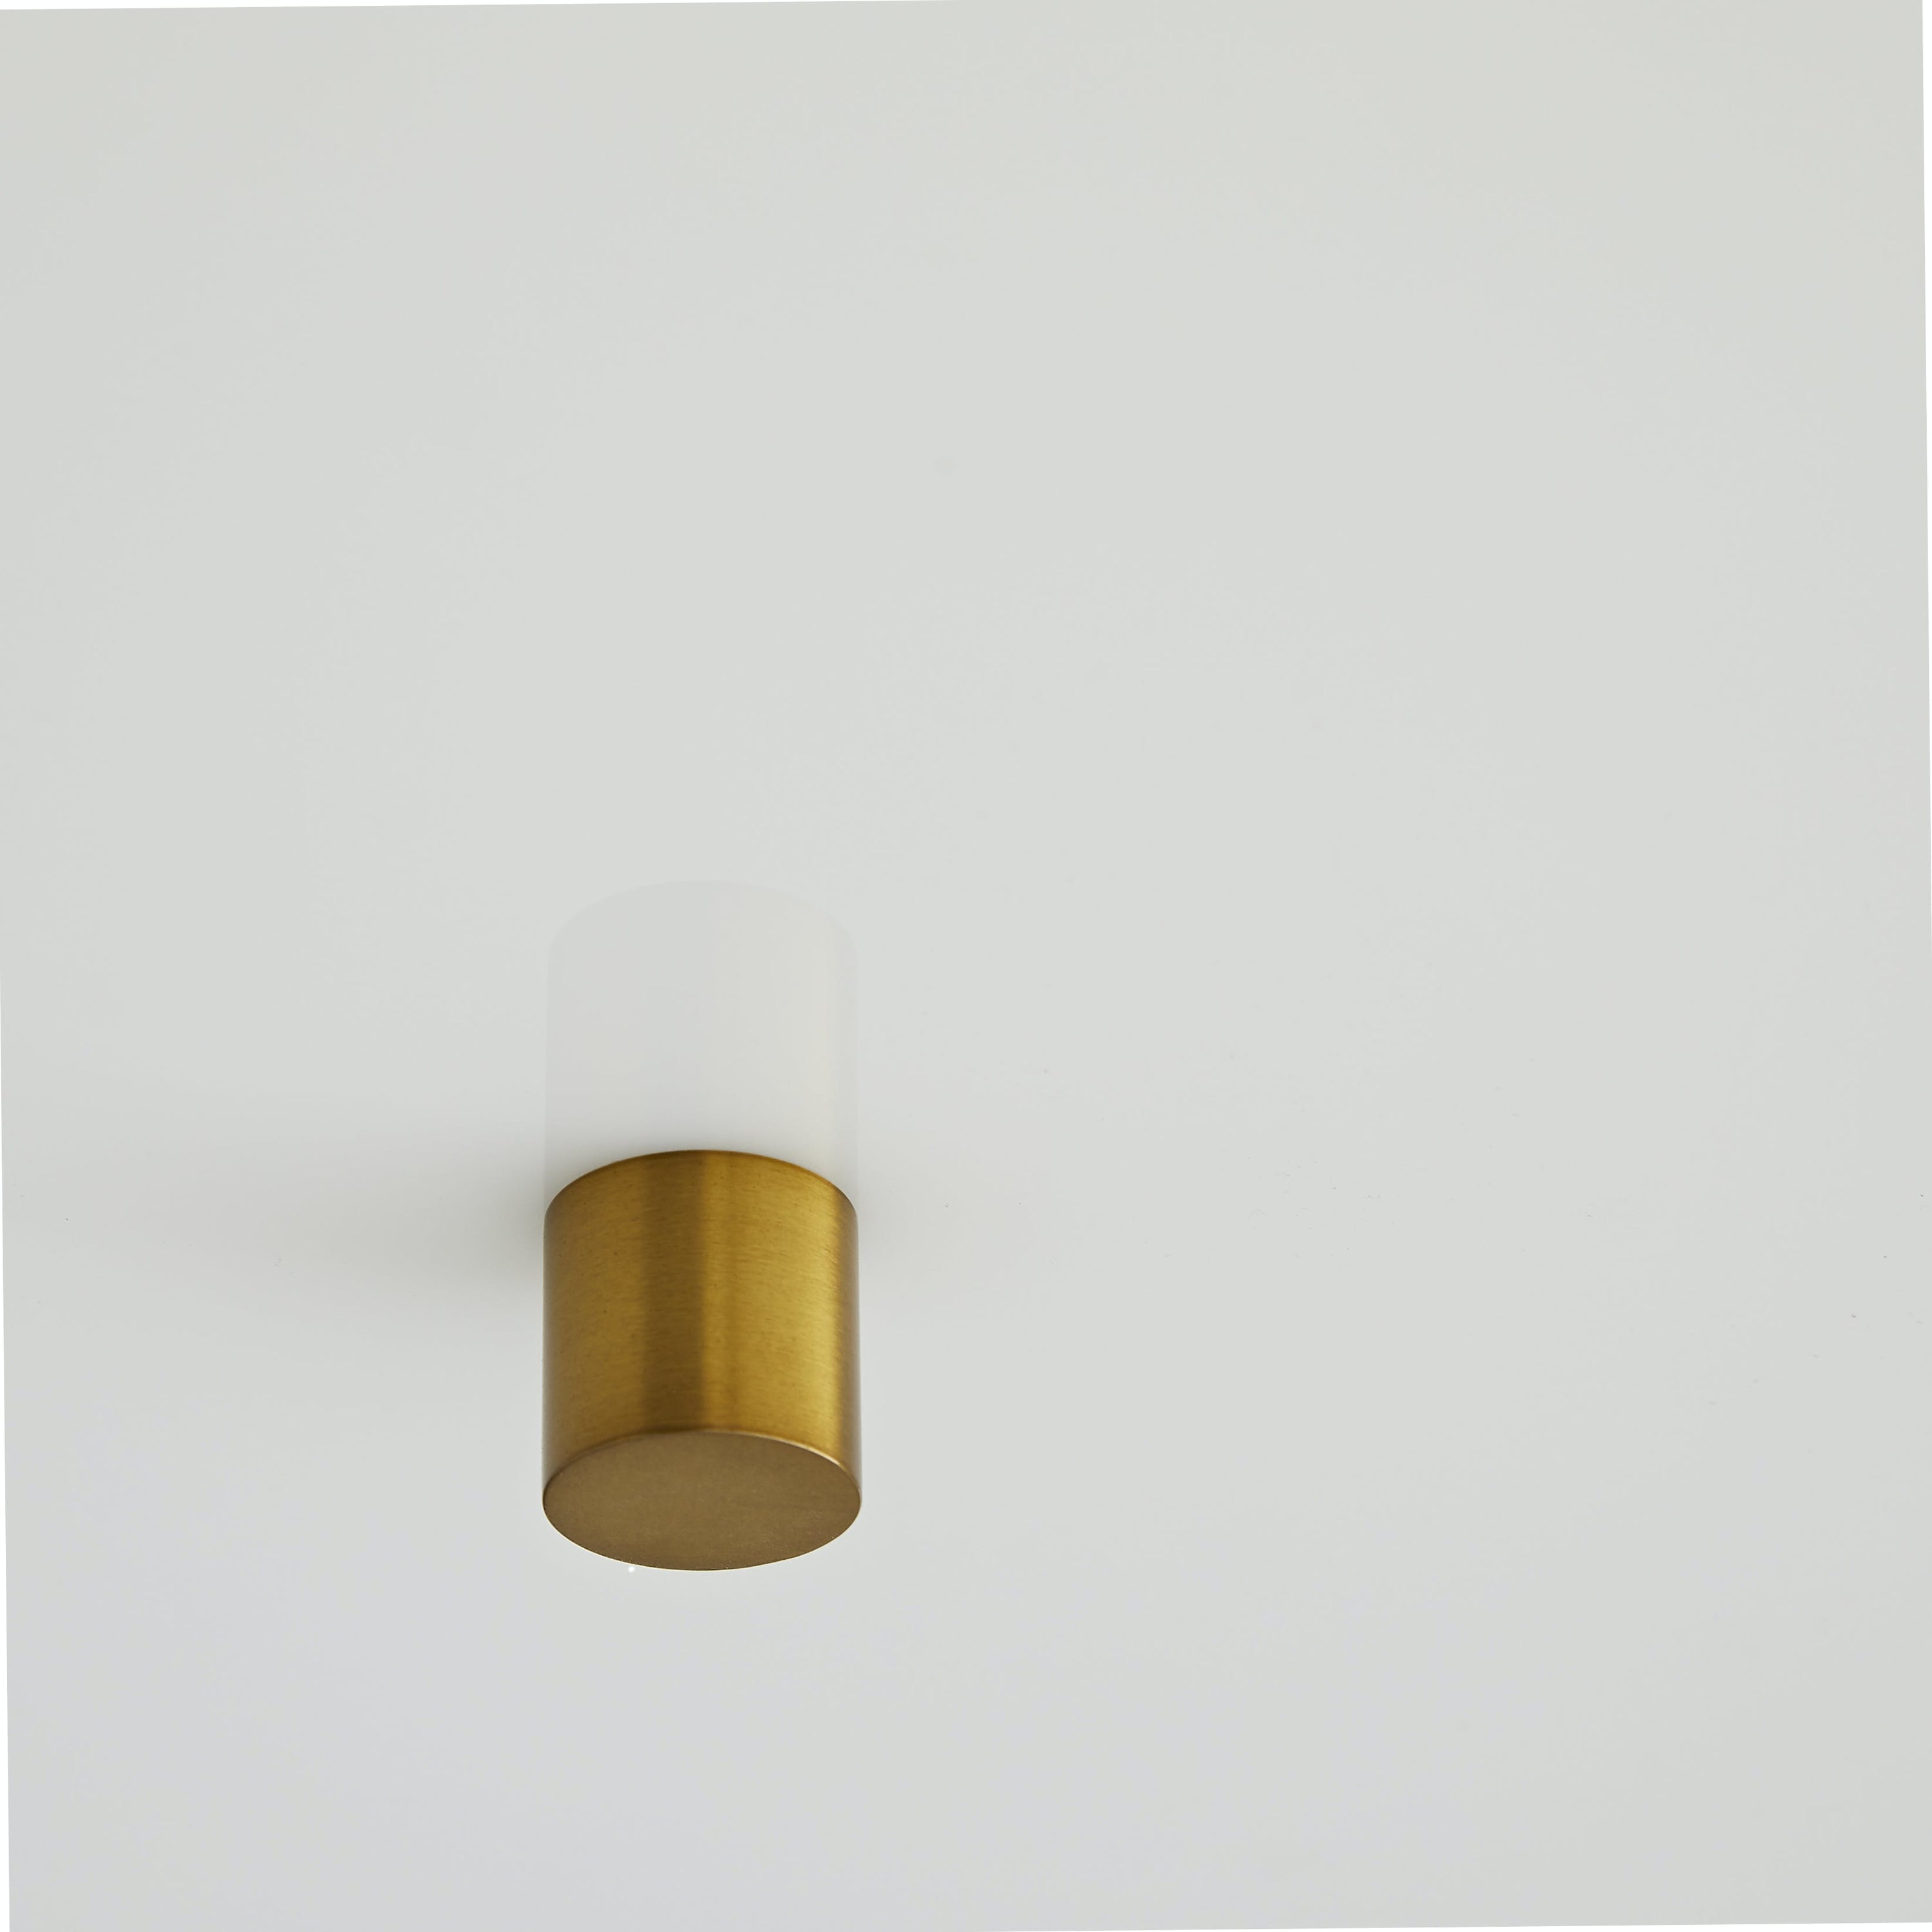 Minimalistic and elegant wall sconce with frosted glass and brass finish.